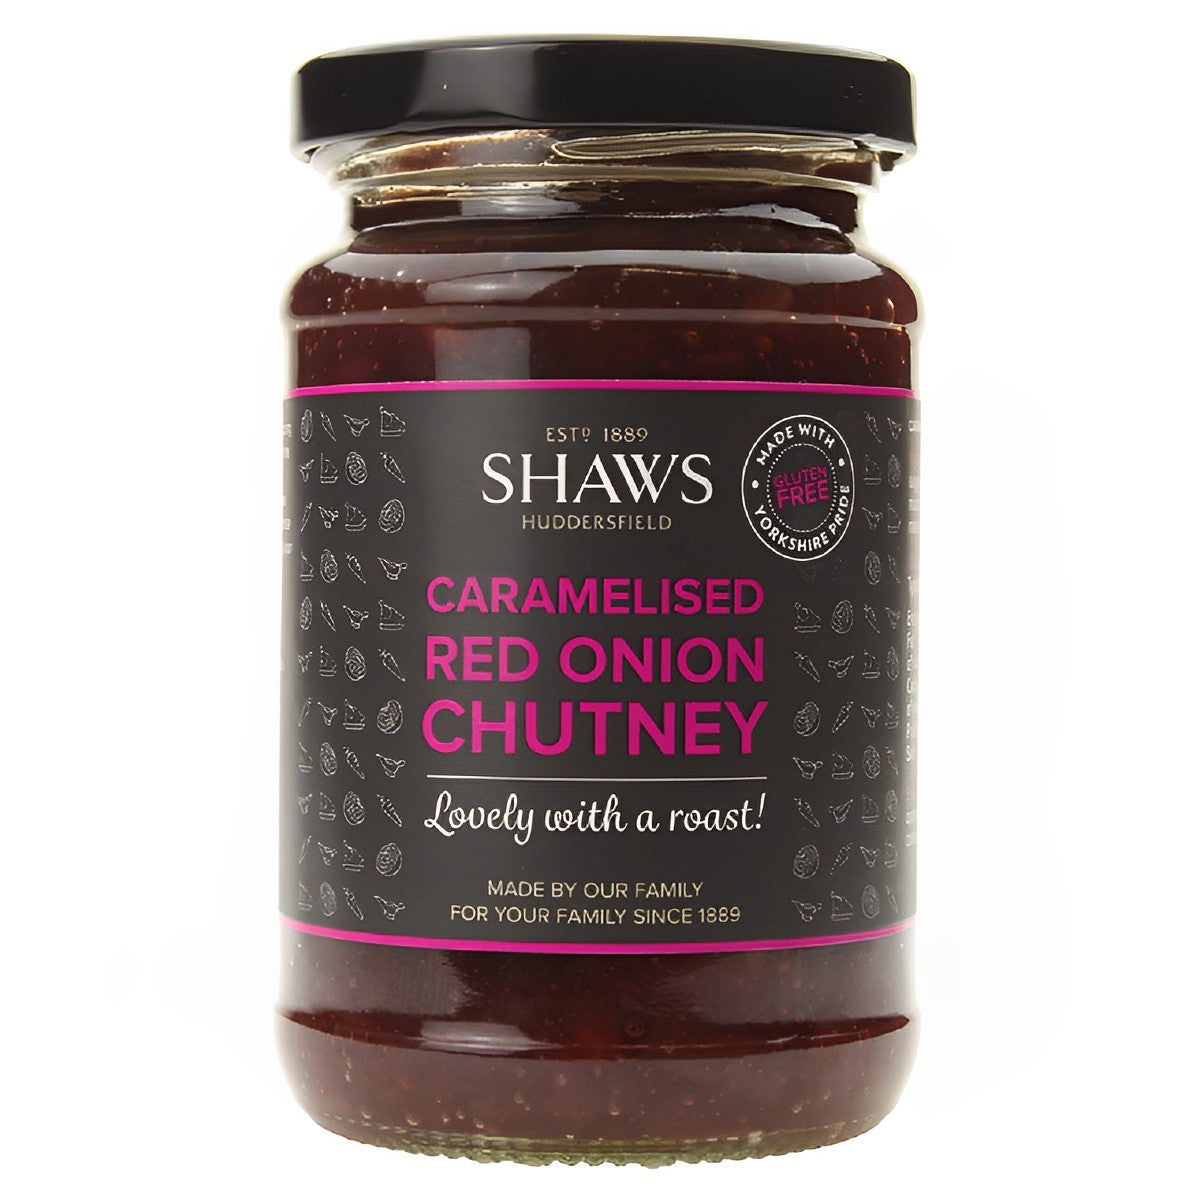 Shaws - Caramelised Red Onion Chutney - 310g - Continental Food Store